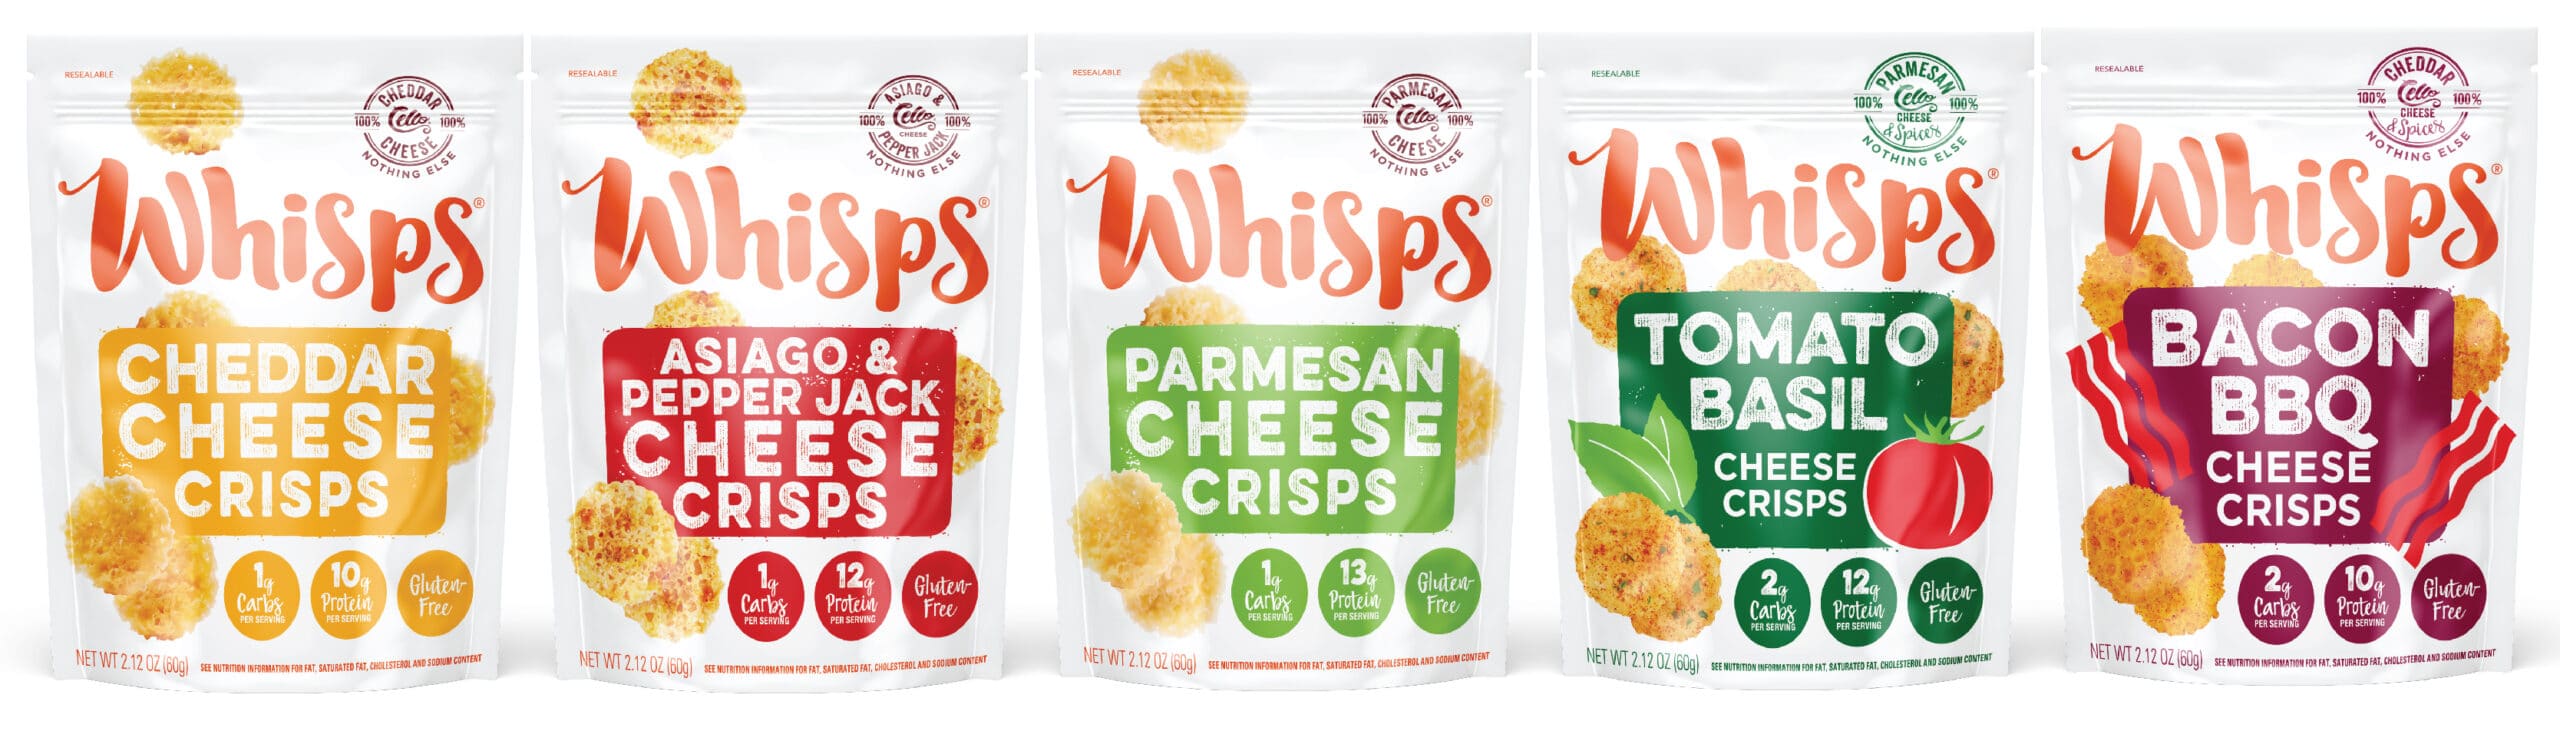 Whisps Cheese Crisps Snack Pouch Packaging Design Scaled 